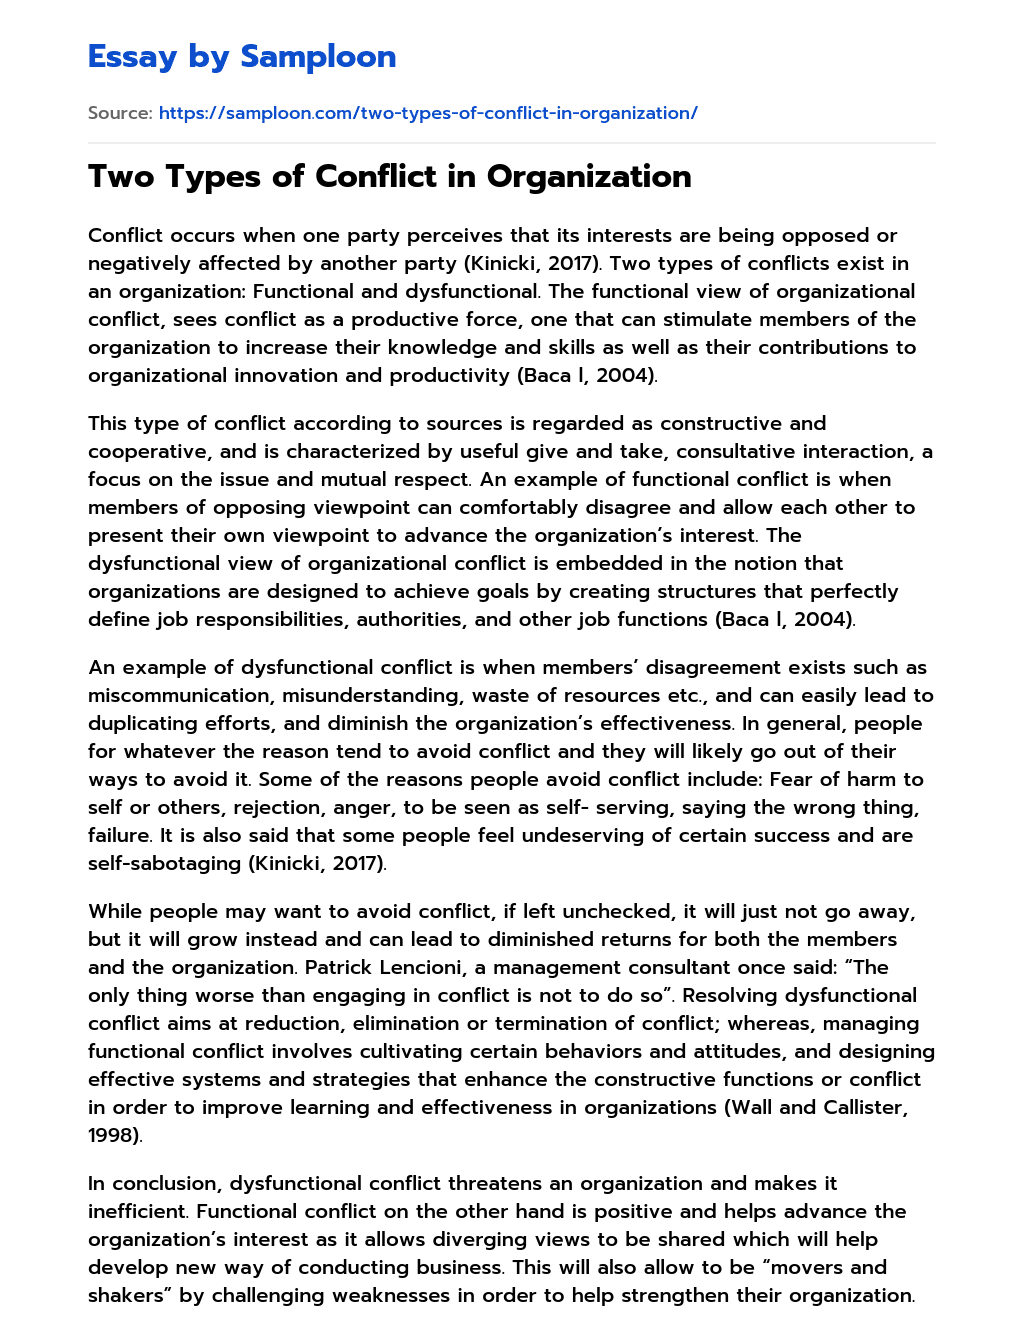 Two Types of Conflict in Organization essay